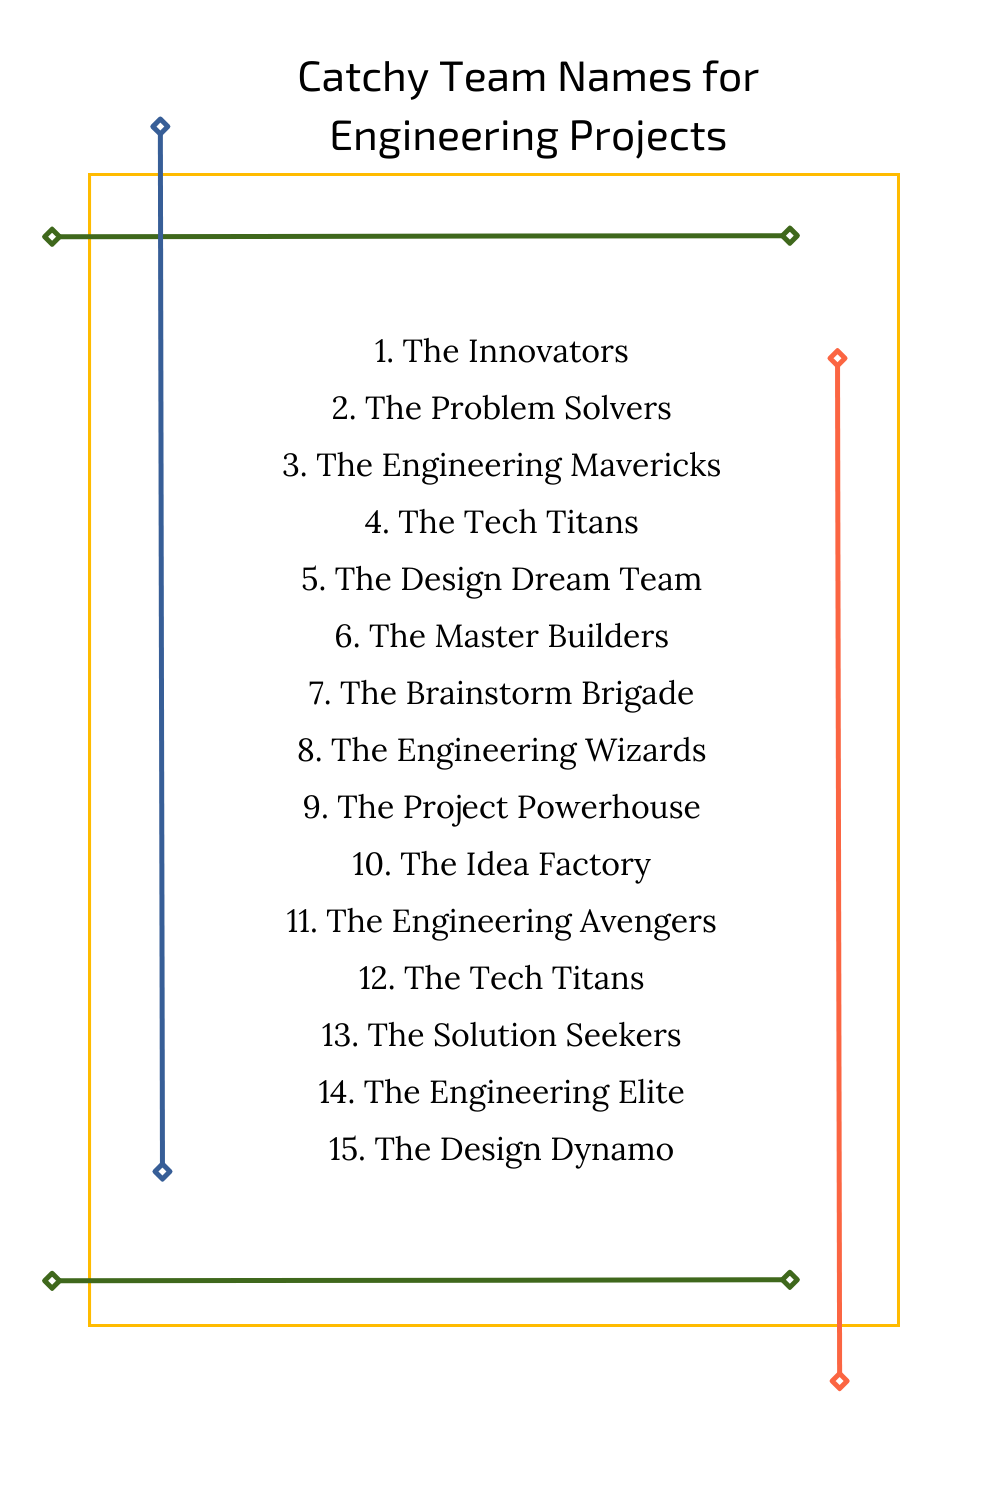 Catchy Team Names for Engineering Projects